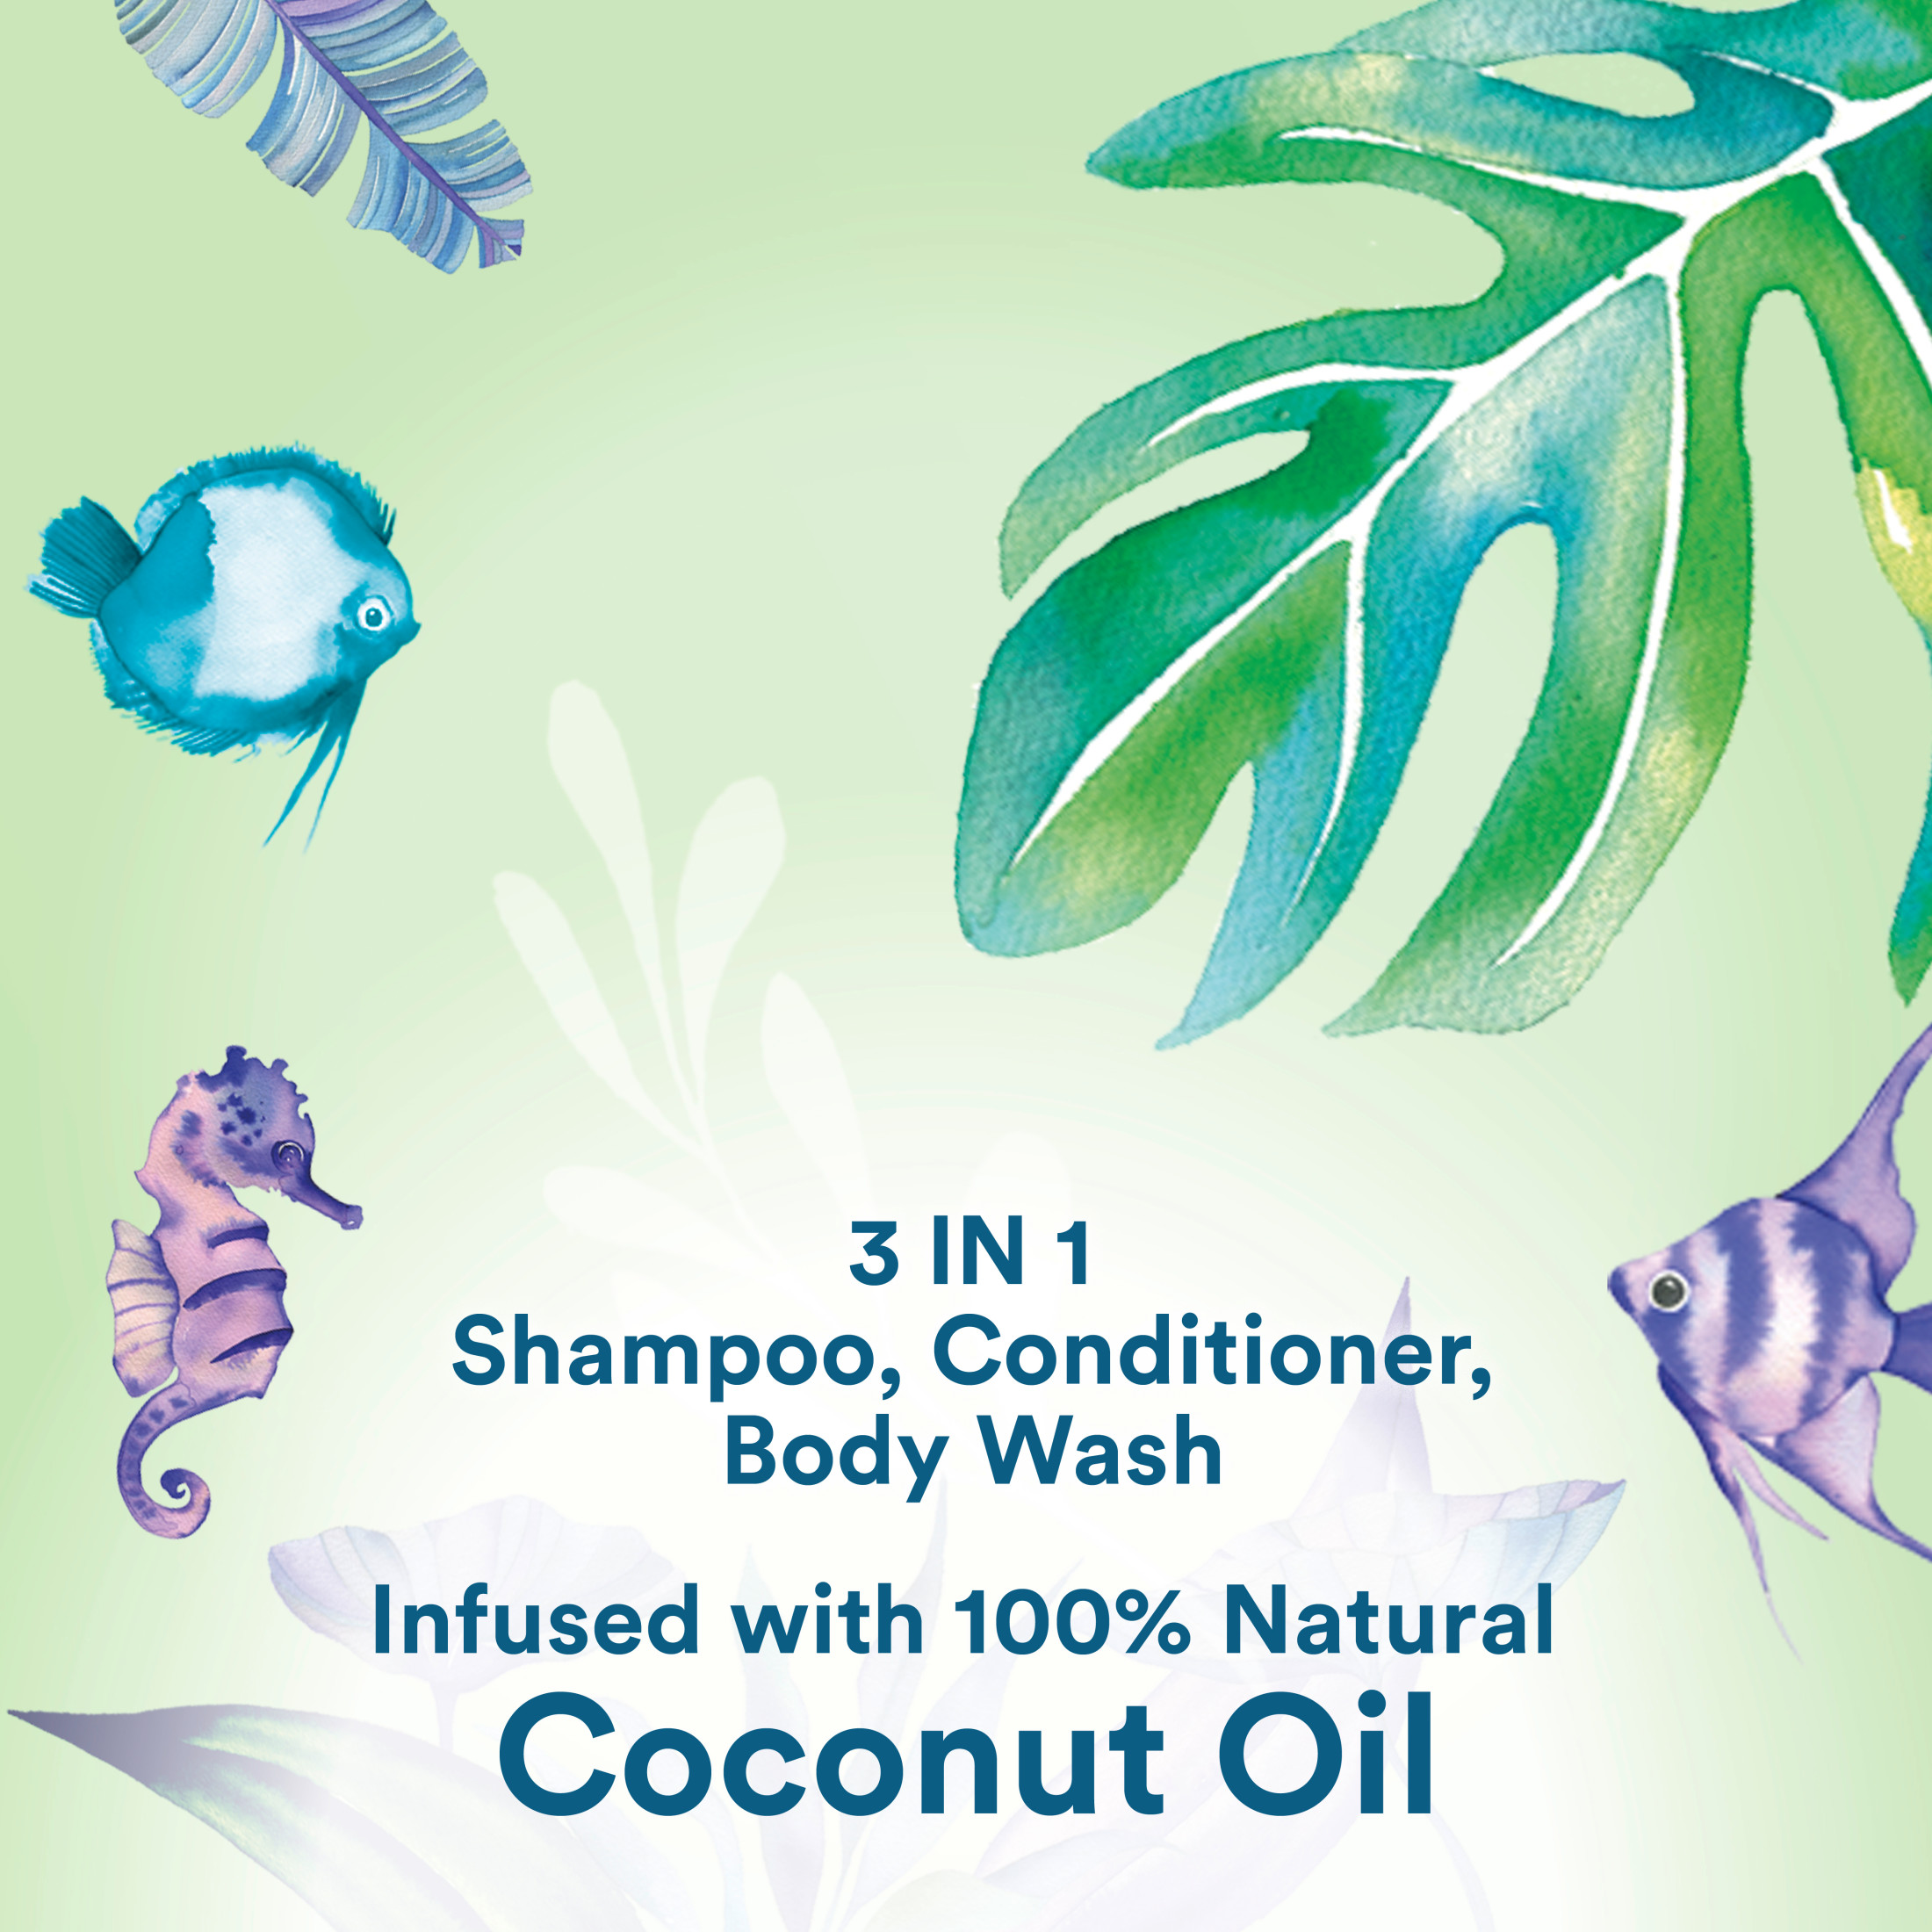 Suave Kids Naturals 3-in-1 Shampoo Conditioner & Body Wash with Coconut Oil, 16.5 oz - image 3 of 10